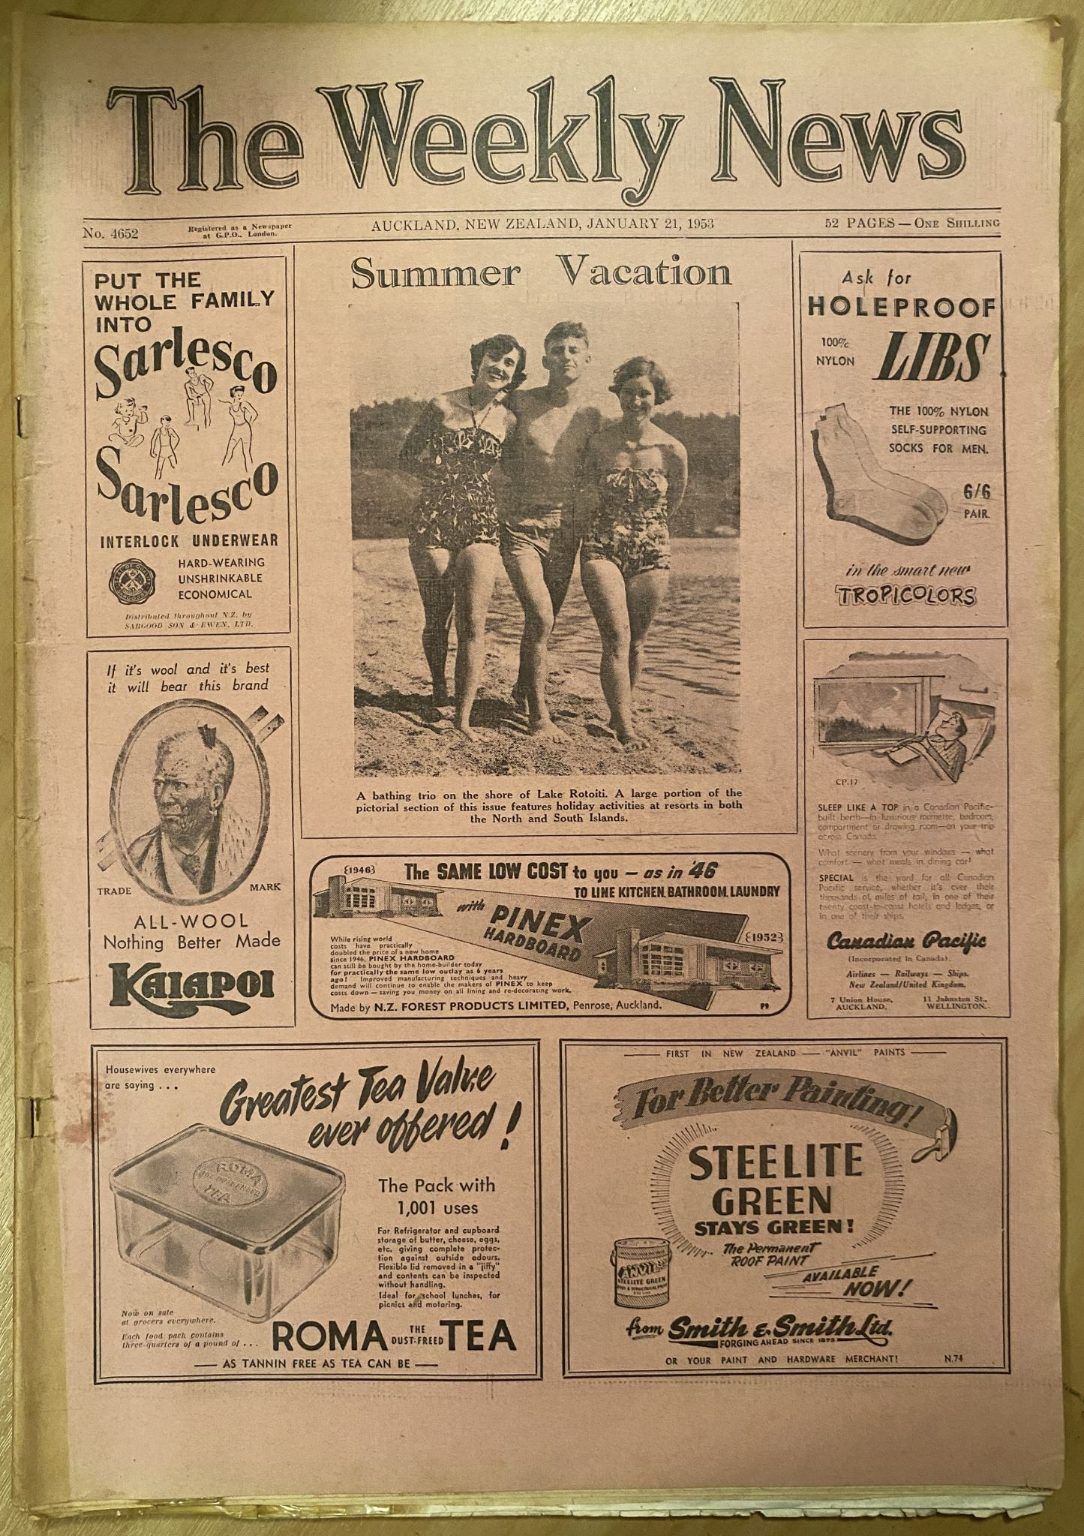 OLD NEWSPAPER: The Weekly News - No. 4652, 21 January 1953